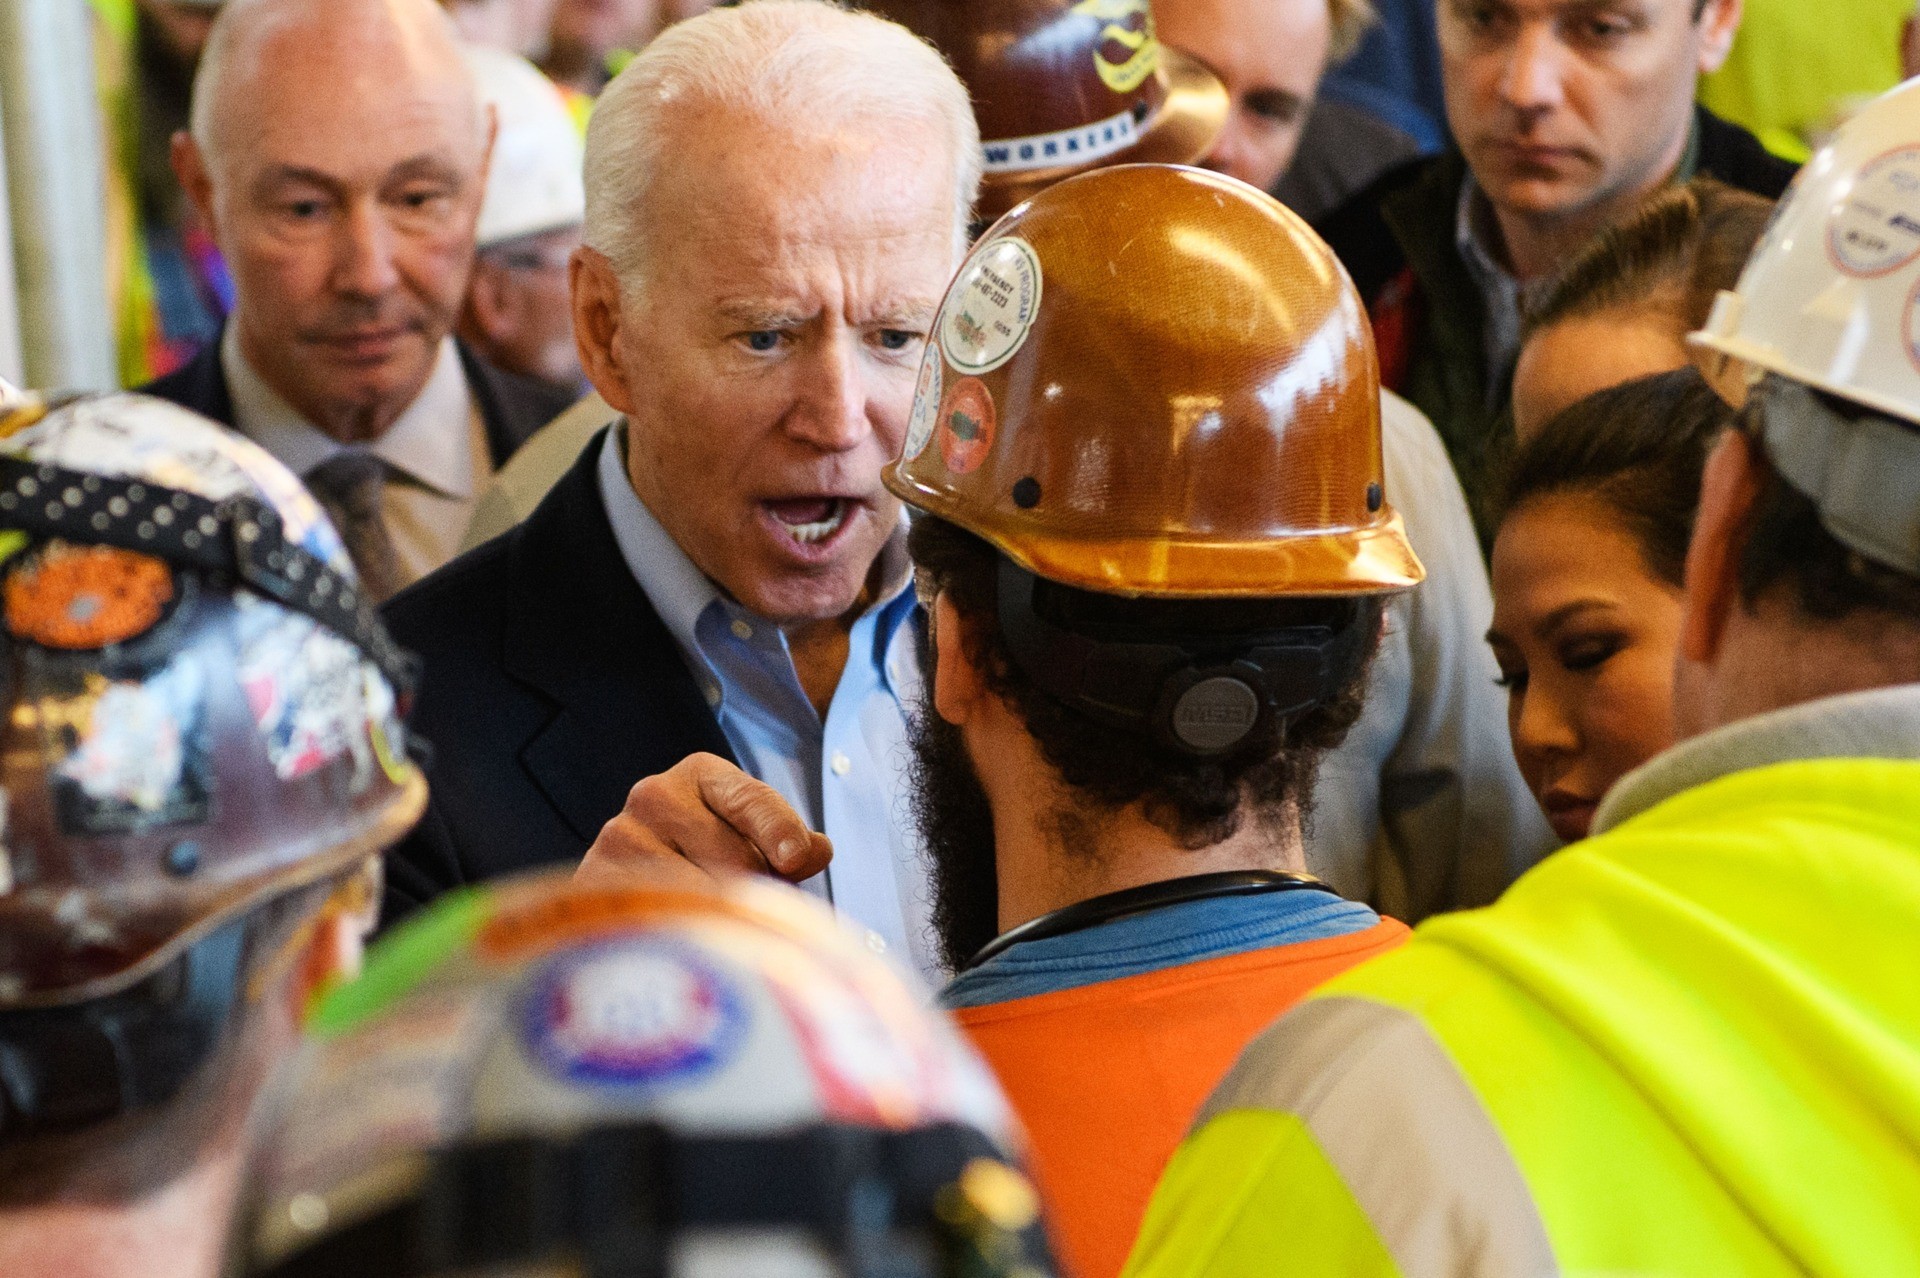 TOPSHOT - Democratic presidential candidate Joe Biden has heated exchange meets workers and discusses gun rights as he tours the Fiat Chrysler plant in Detroit, Michigan on March 10, 2020. - Biden opened primary day meeting workers at an under-construction automobile plant in Detroit, where he received cheers but also was confronted by one worker. In an exchange avidly shared online by Trump supporters, the worker, wearing a construction helmet and reflective vest, accused Biden of seeking to weaken the constitutional right to own firearms. "You're full of shit," Biden shot back. "I support the Second Amendment." When the worker pressed the issue, Biden, visibly agitated and with a raised voice, said "I'm not taking your gun away," adding, "Gimme a break, man." (Photo by MANDEL NGAN / AFP) (Photo by MANDEL NGAN/AFP via Getty Images)